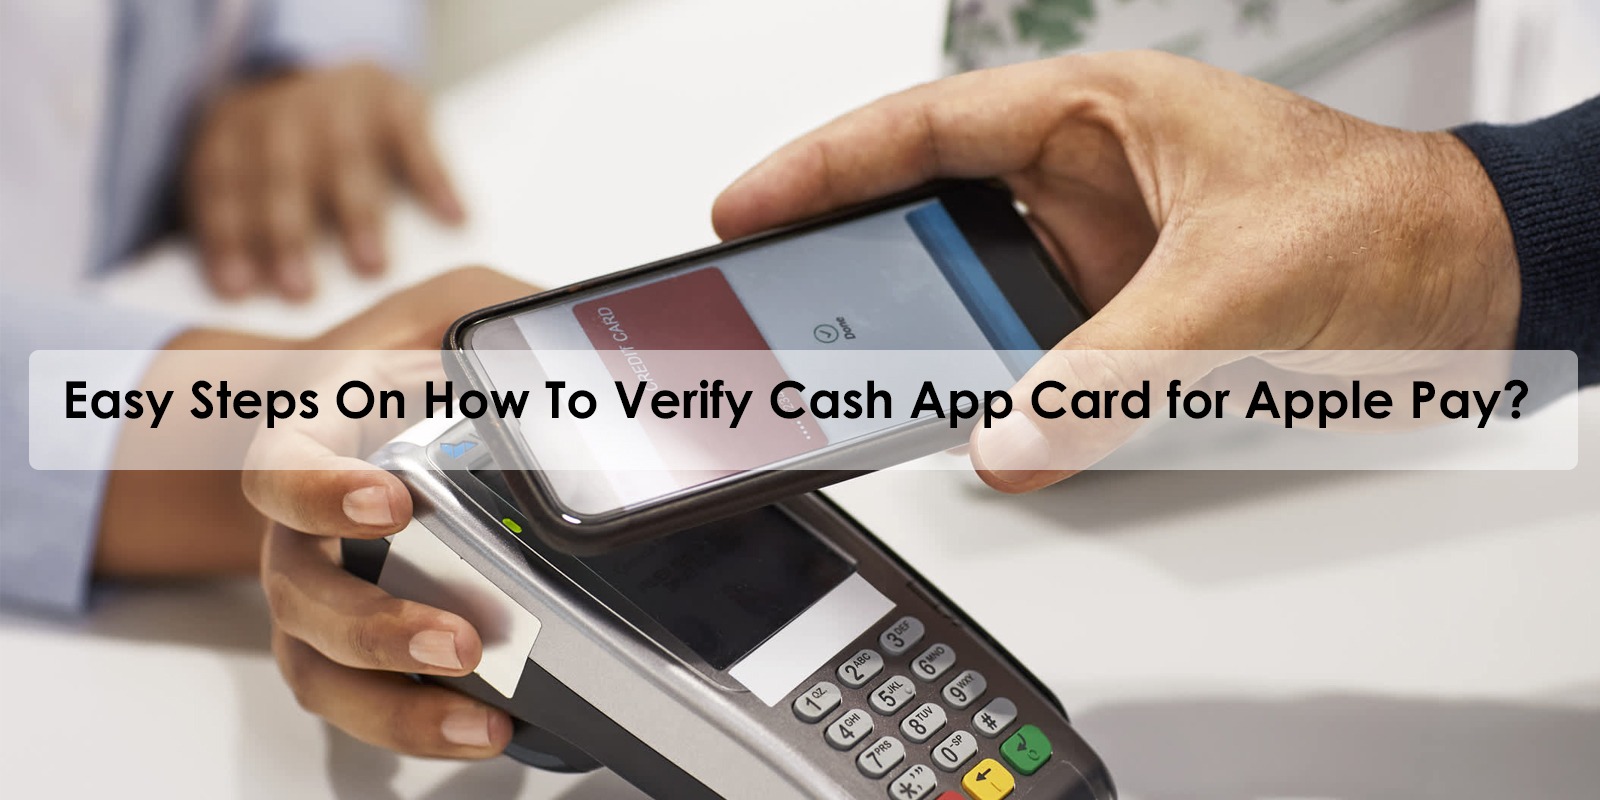 Easy Steps On How To Verify Cash App Card for Apple Pay?